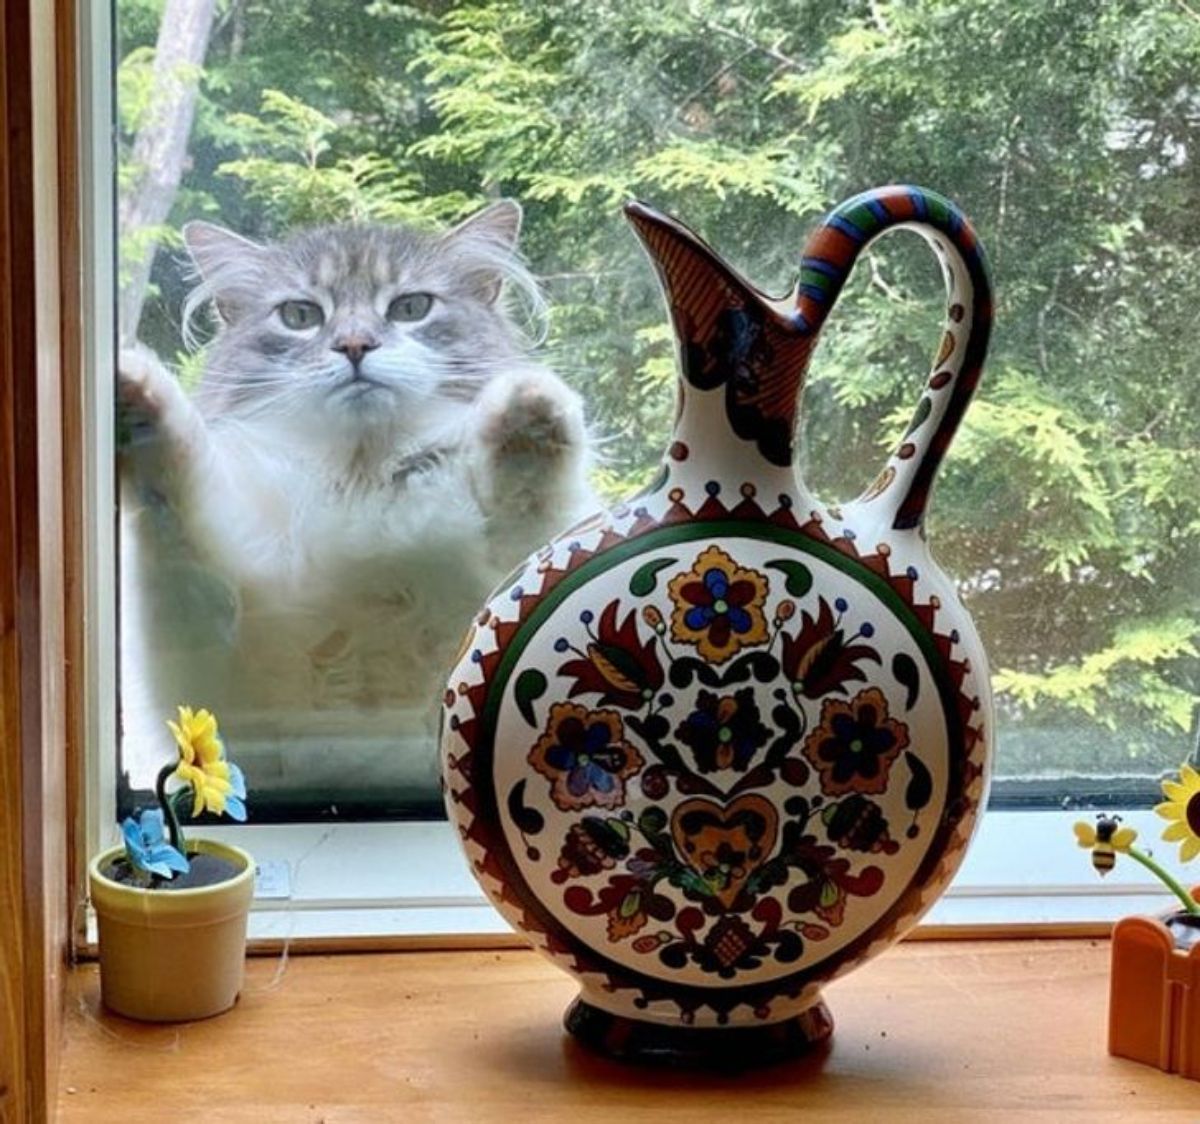 grey and white fluffy cat with front paws on the outside of the glass on the window looking in